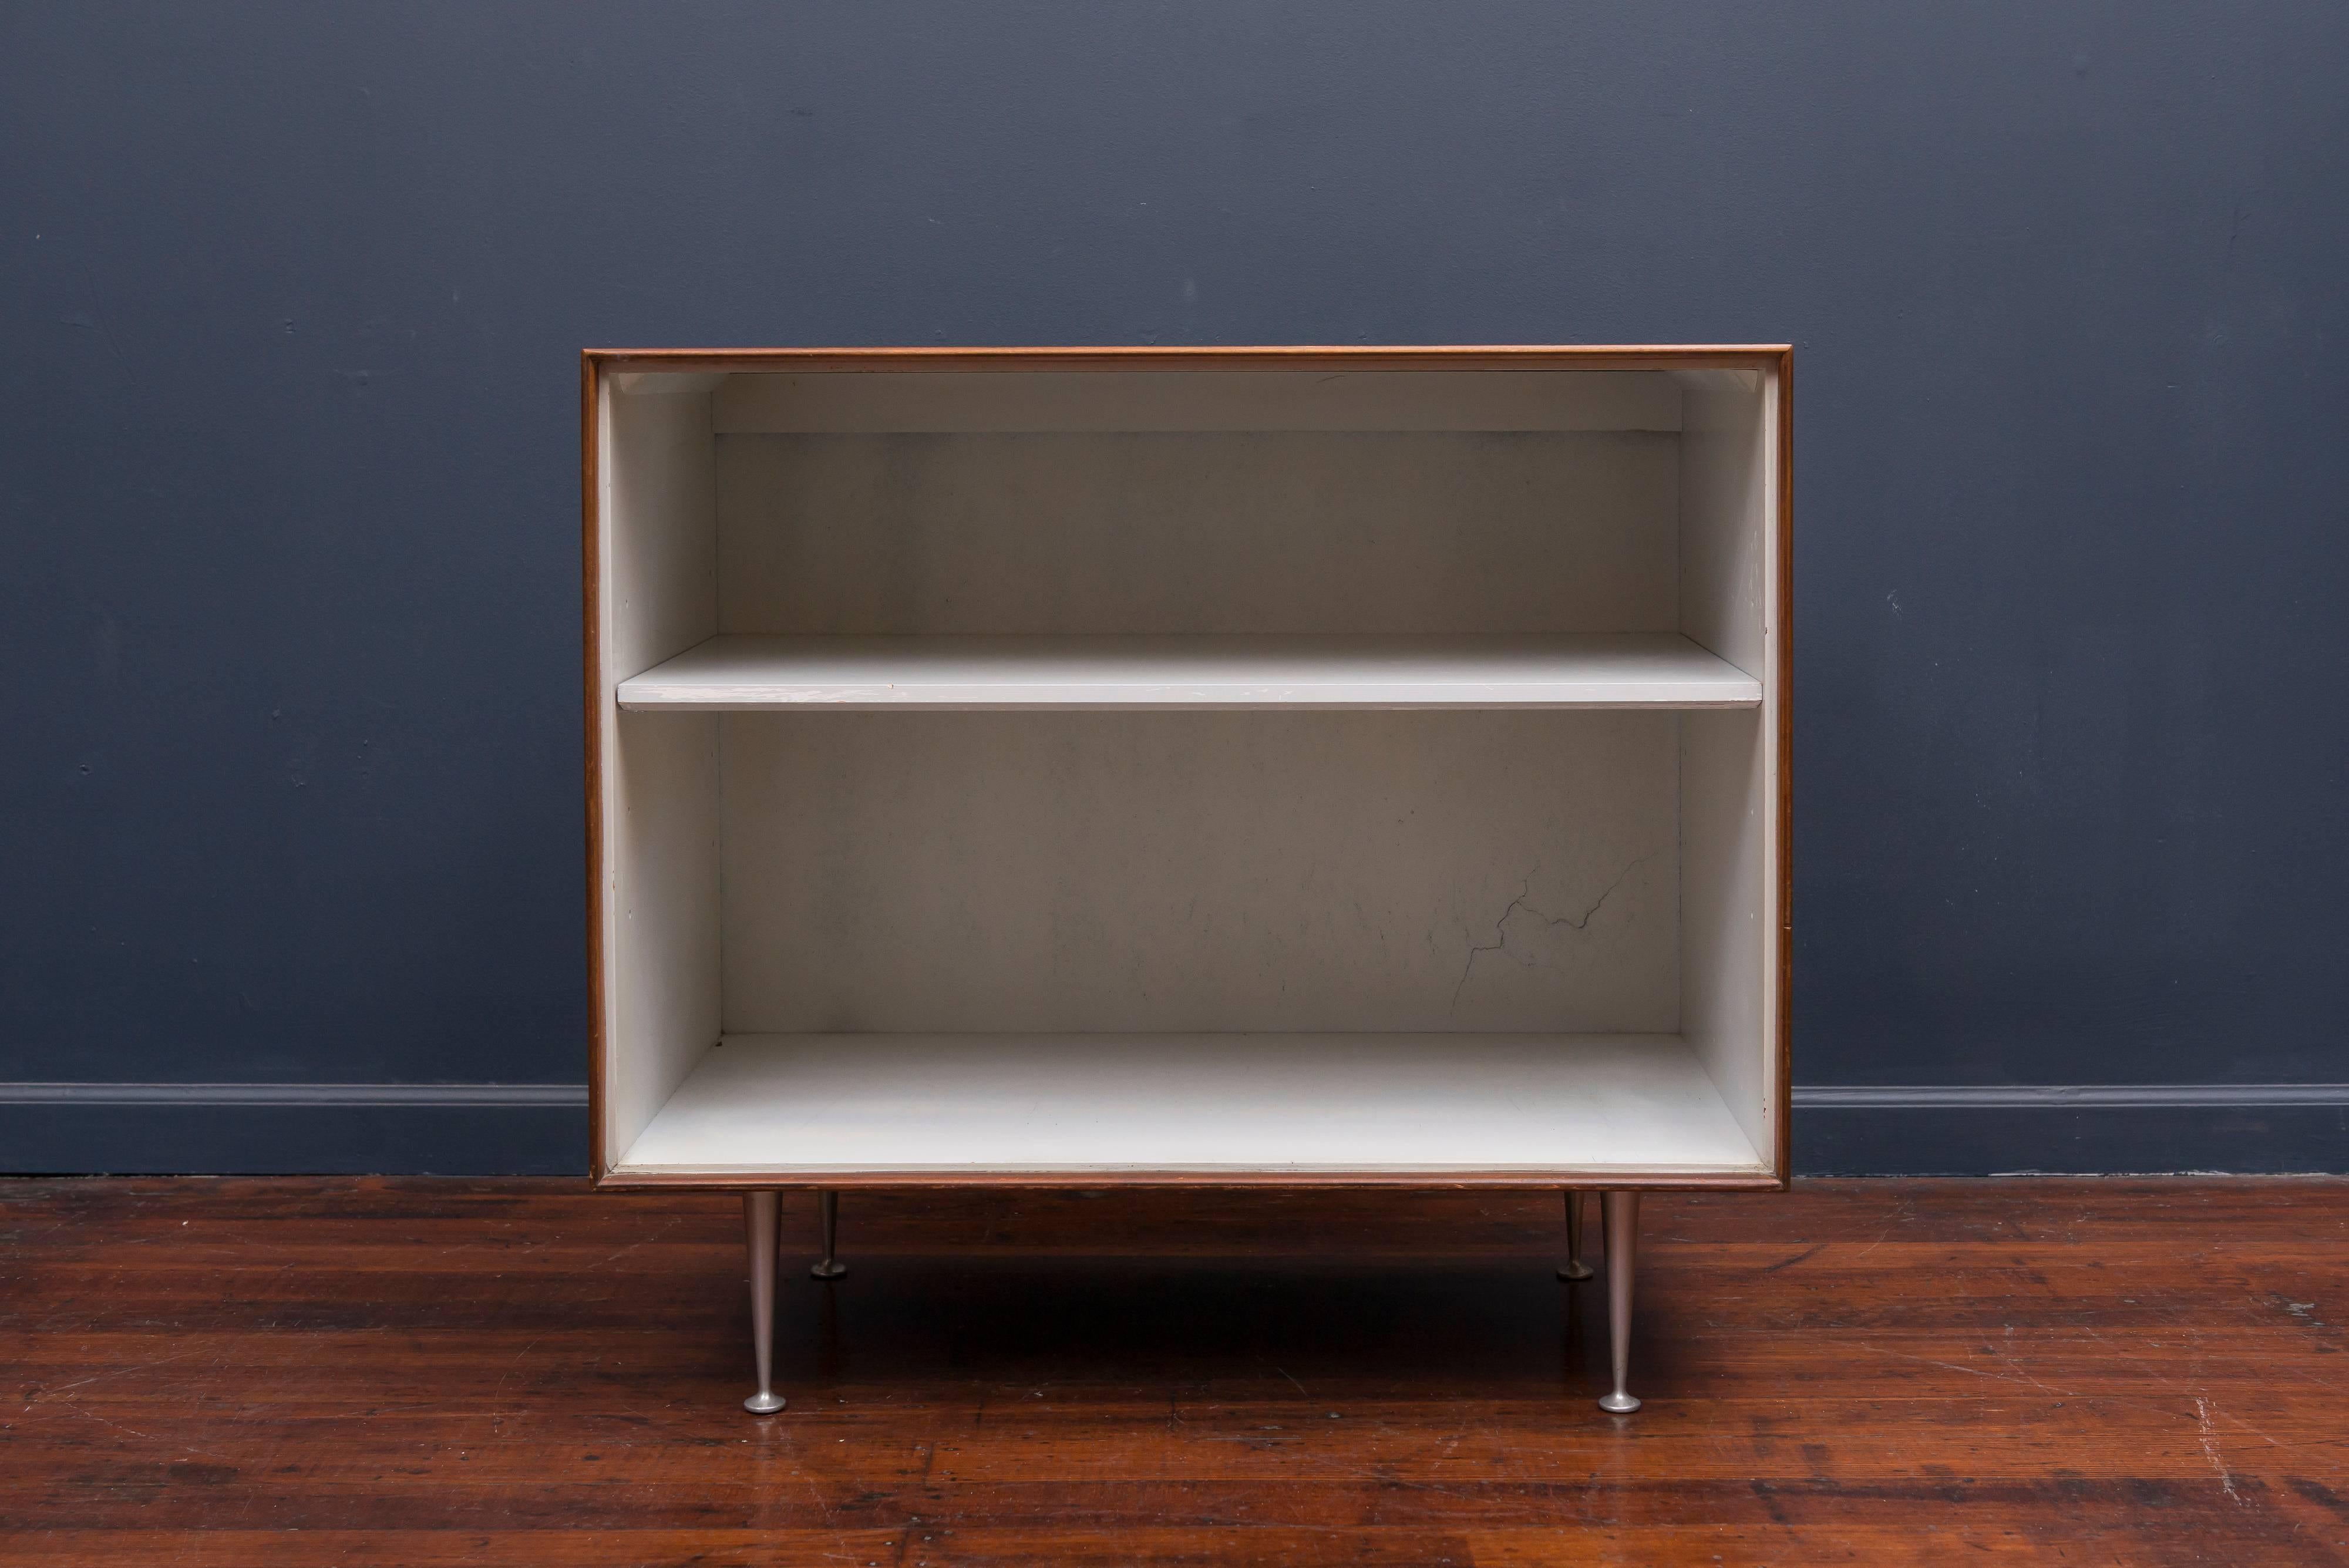 George Nelson thin edge bookshelf for Herman Miller. Rare model bookshelf from this series in very good original condition with expected age appropriate wear.